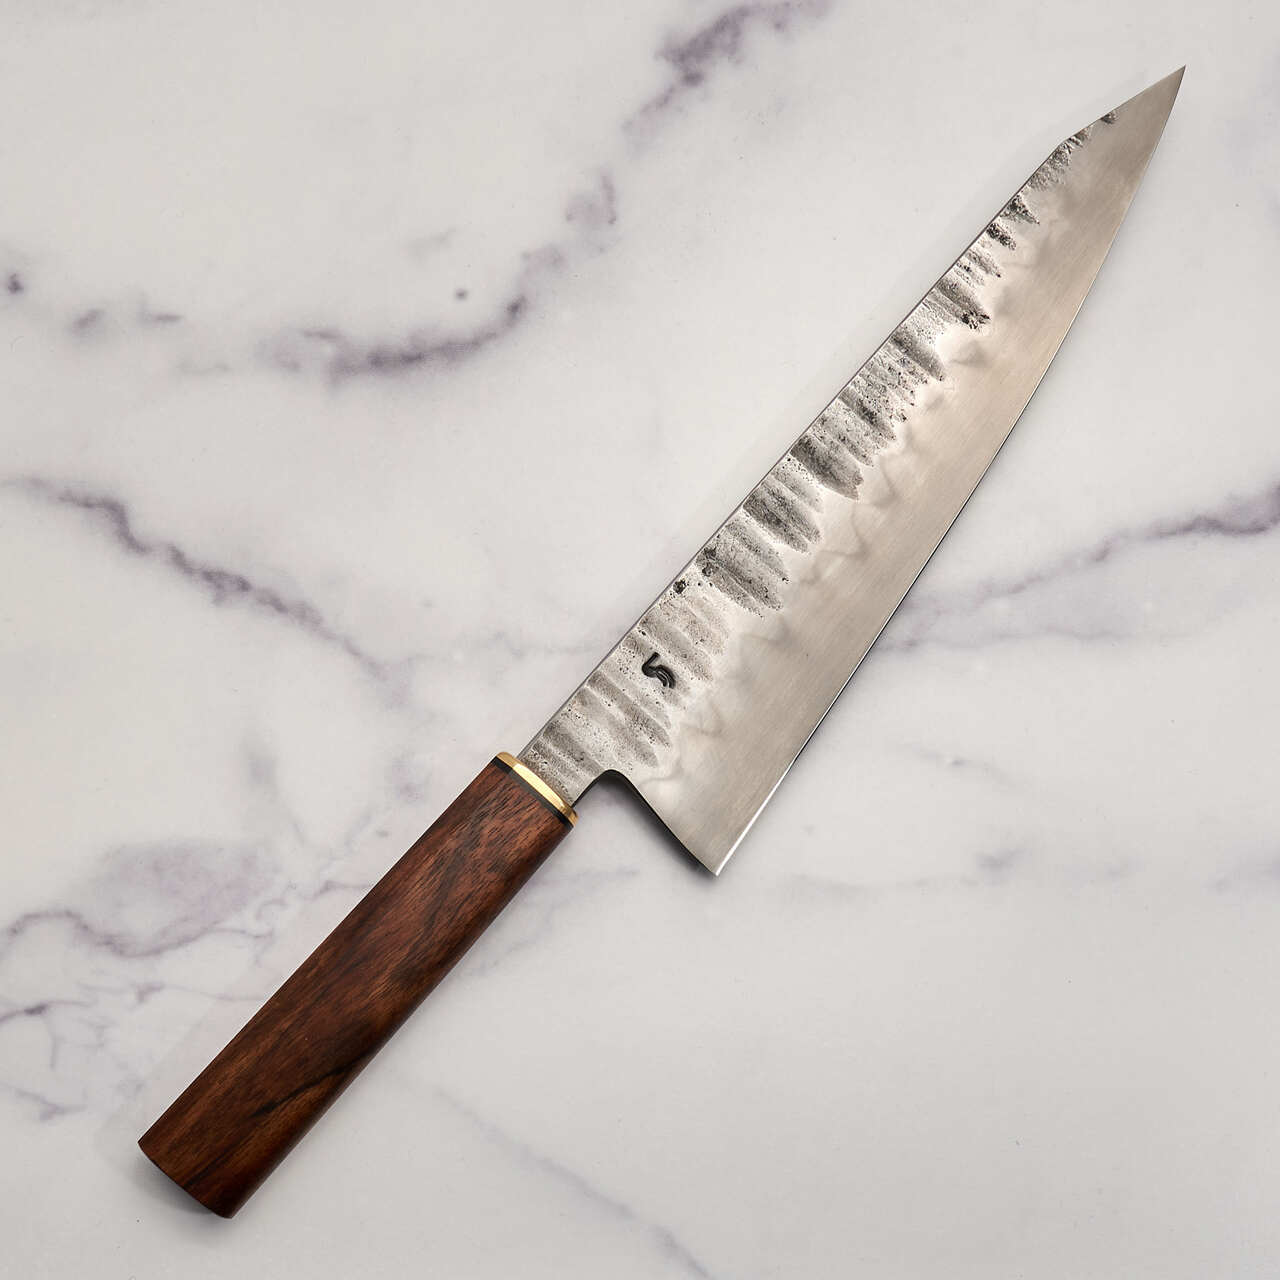 MCX K-Tip Gyuto 230mm 26c3 Limited Release by Fredrik Spåre - 2nd Edition - Blade